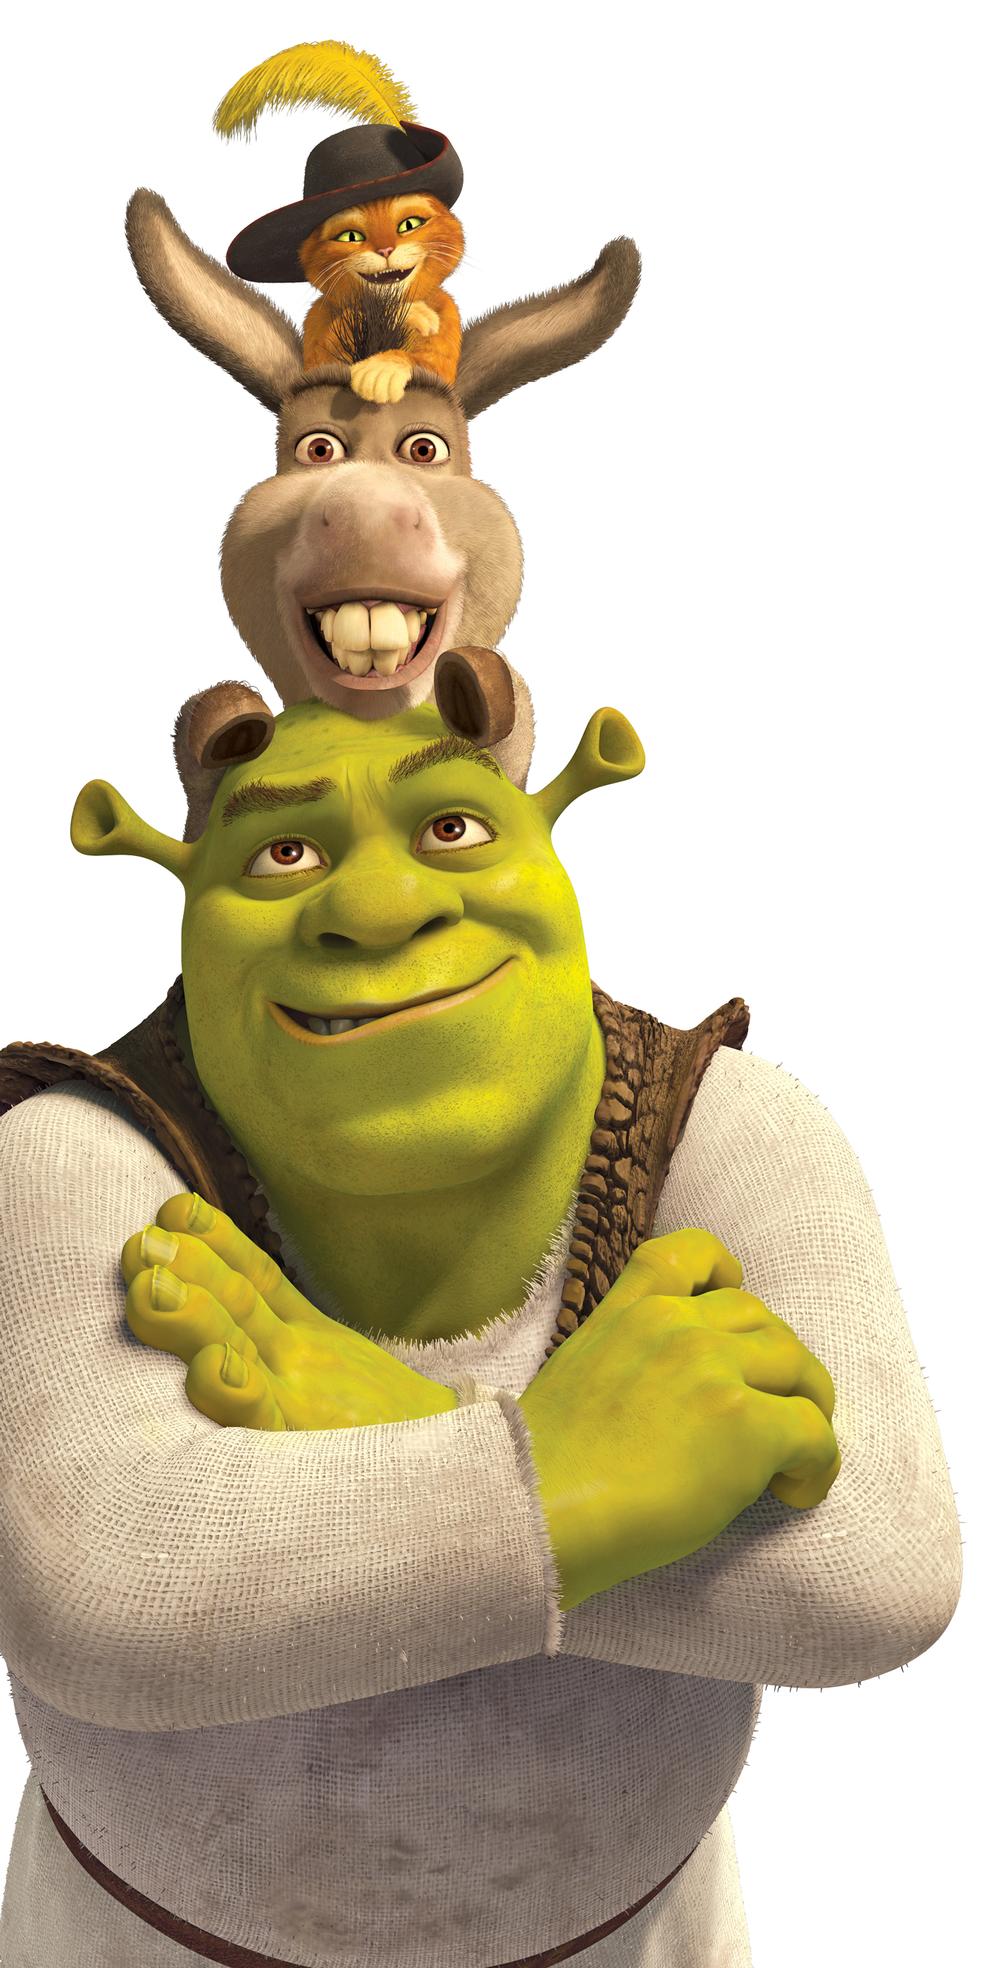 Shrek is an evergreen IP in more ways than one